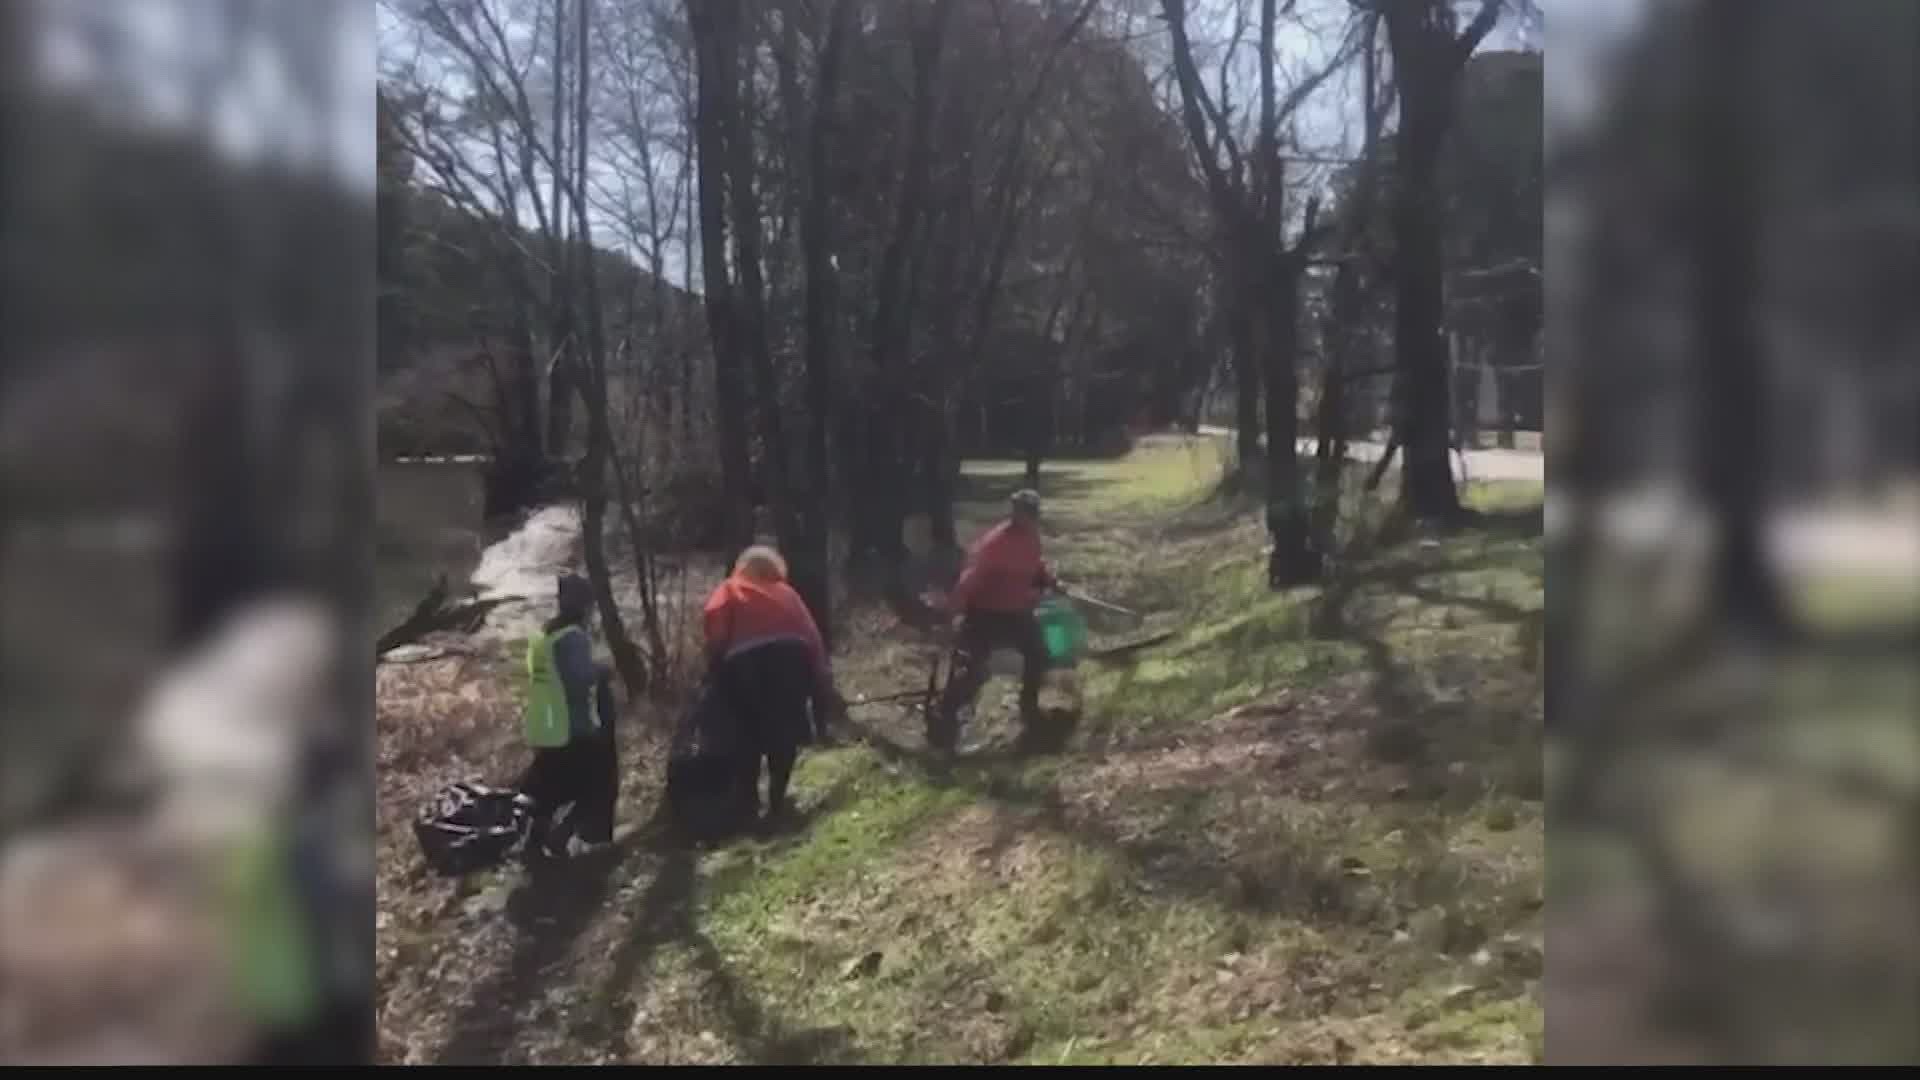 This cleanup was organized by Tennessee Riverkeeper. The group went out and picked up over a thousand pounds of litter along Brush Creek located in Decatur.